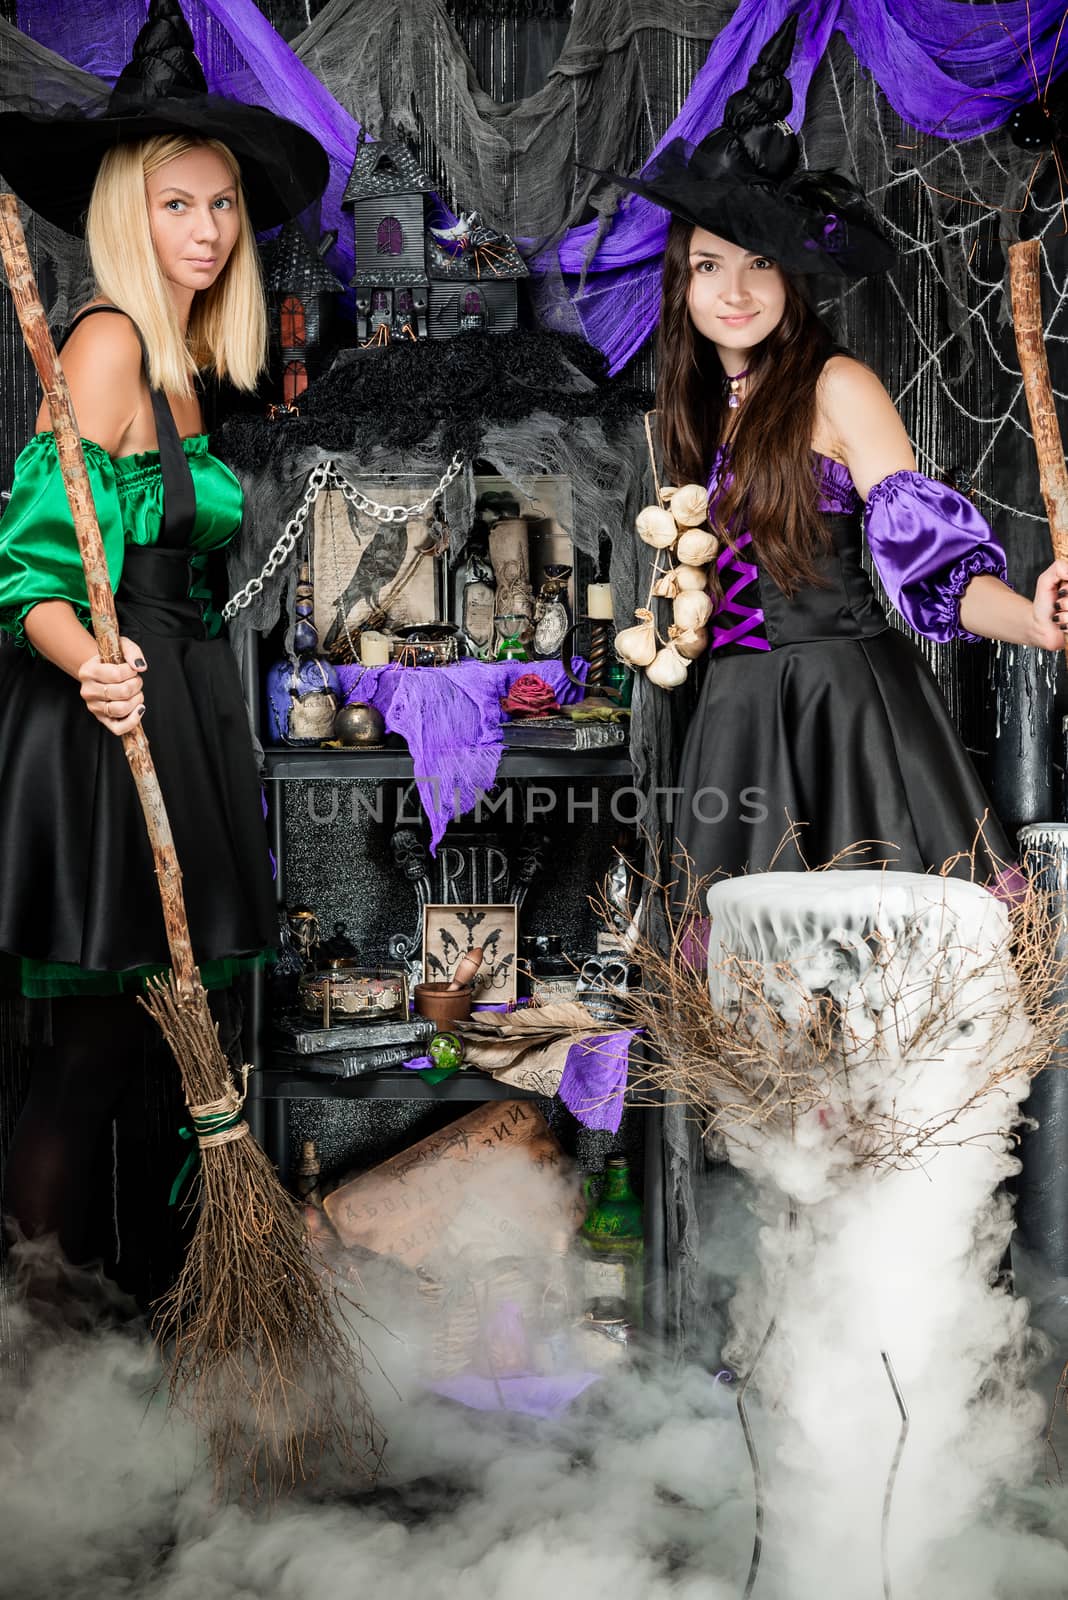 Beautiful young witches brewing a potion in a cauldron